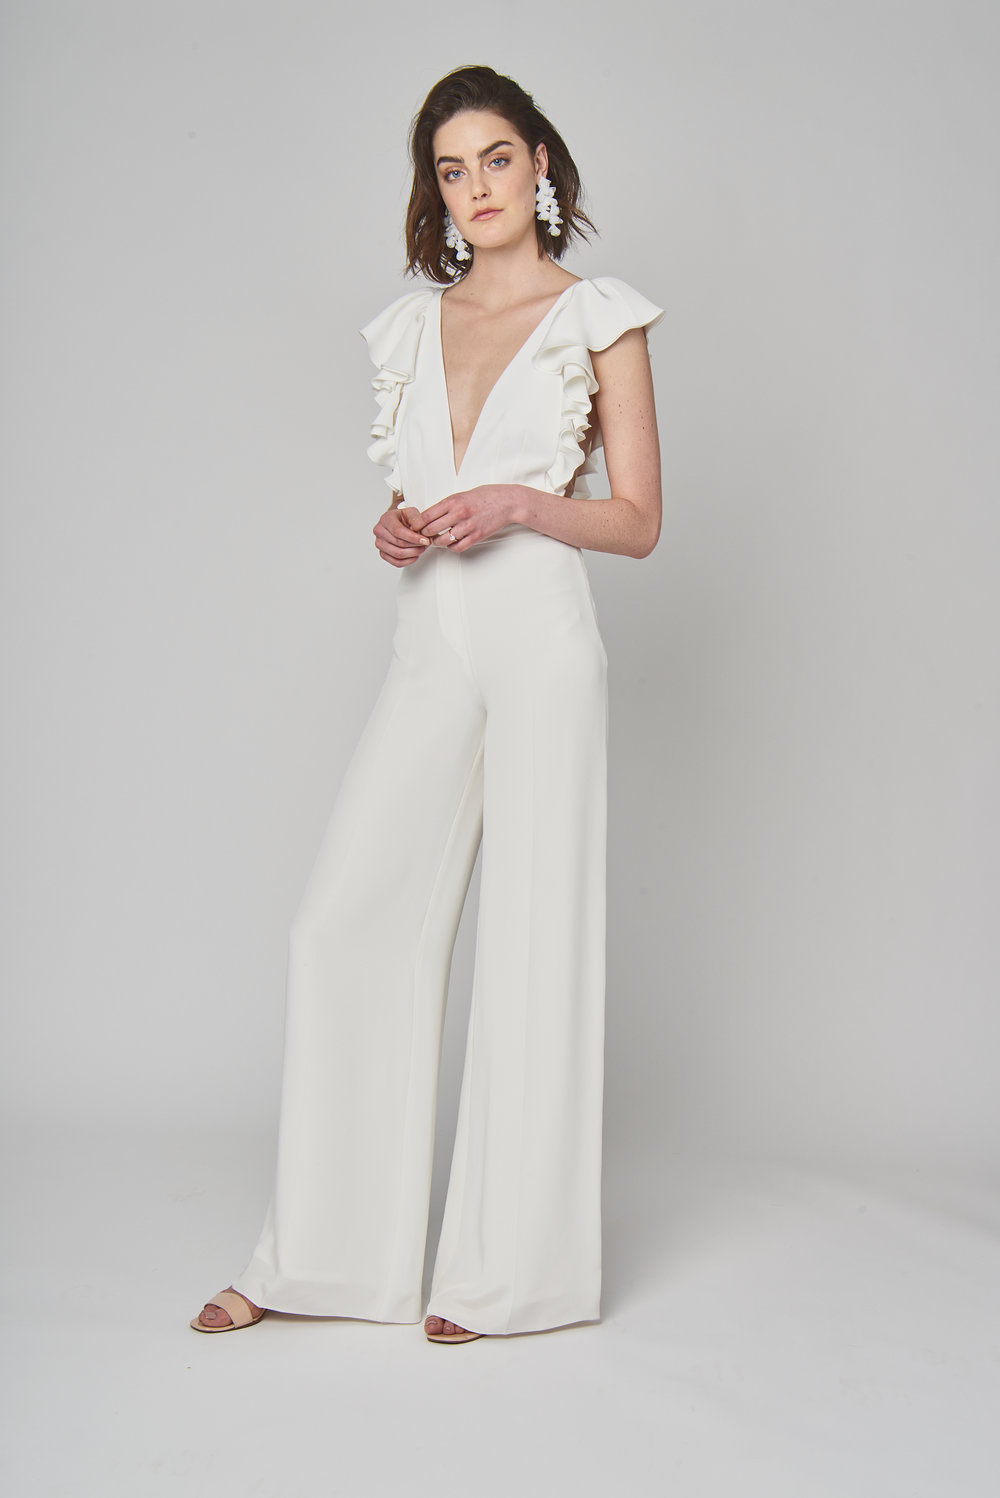 More Wedding Wear Trends - White Suits and Separates — Bespoke & Beloved